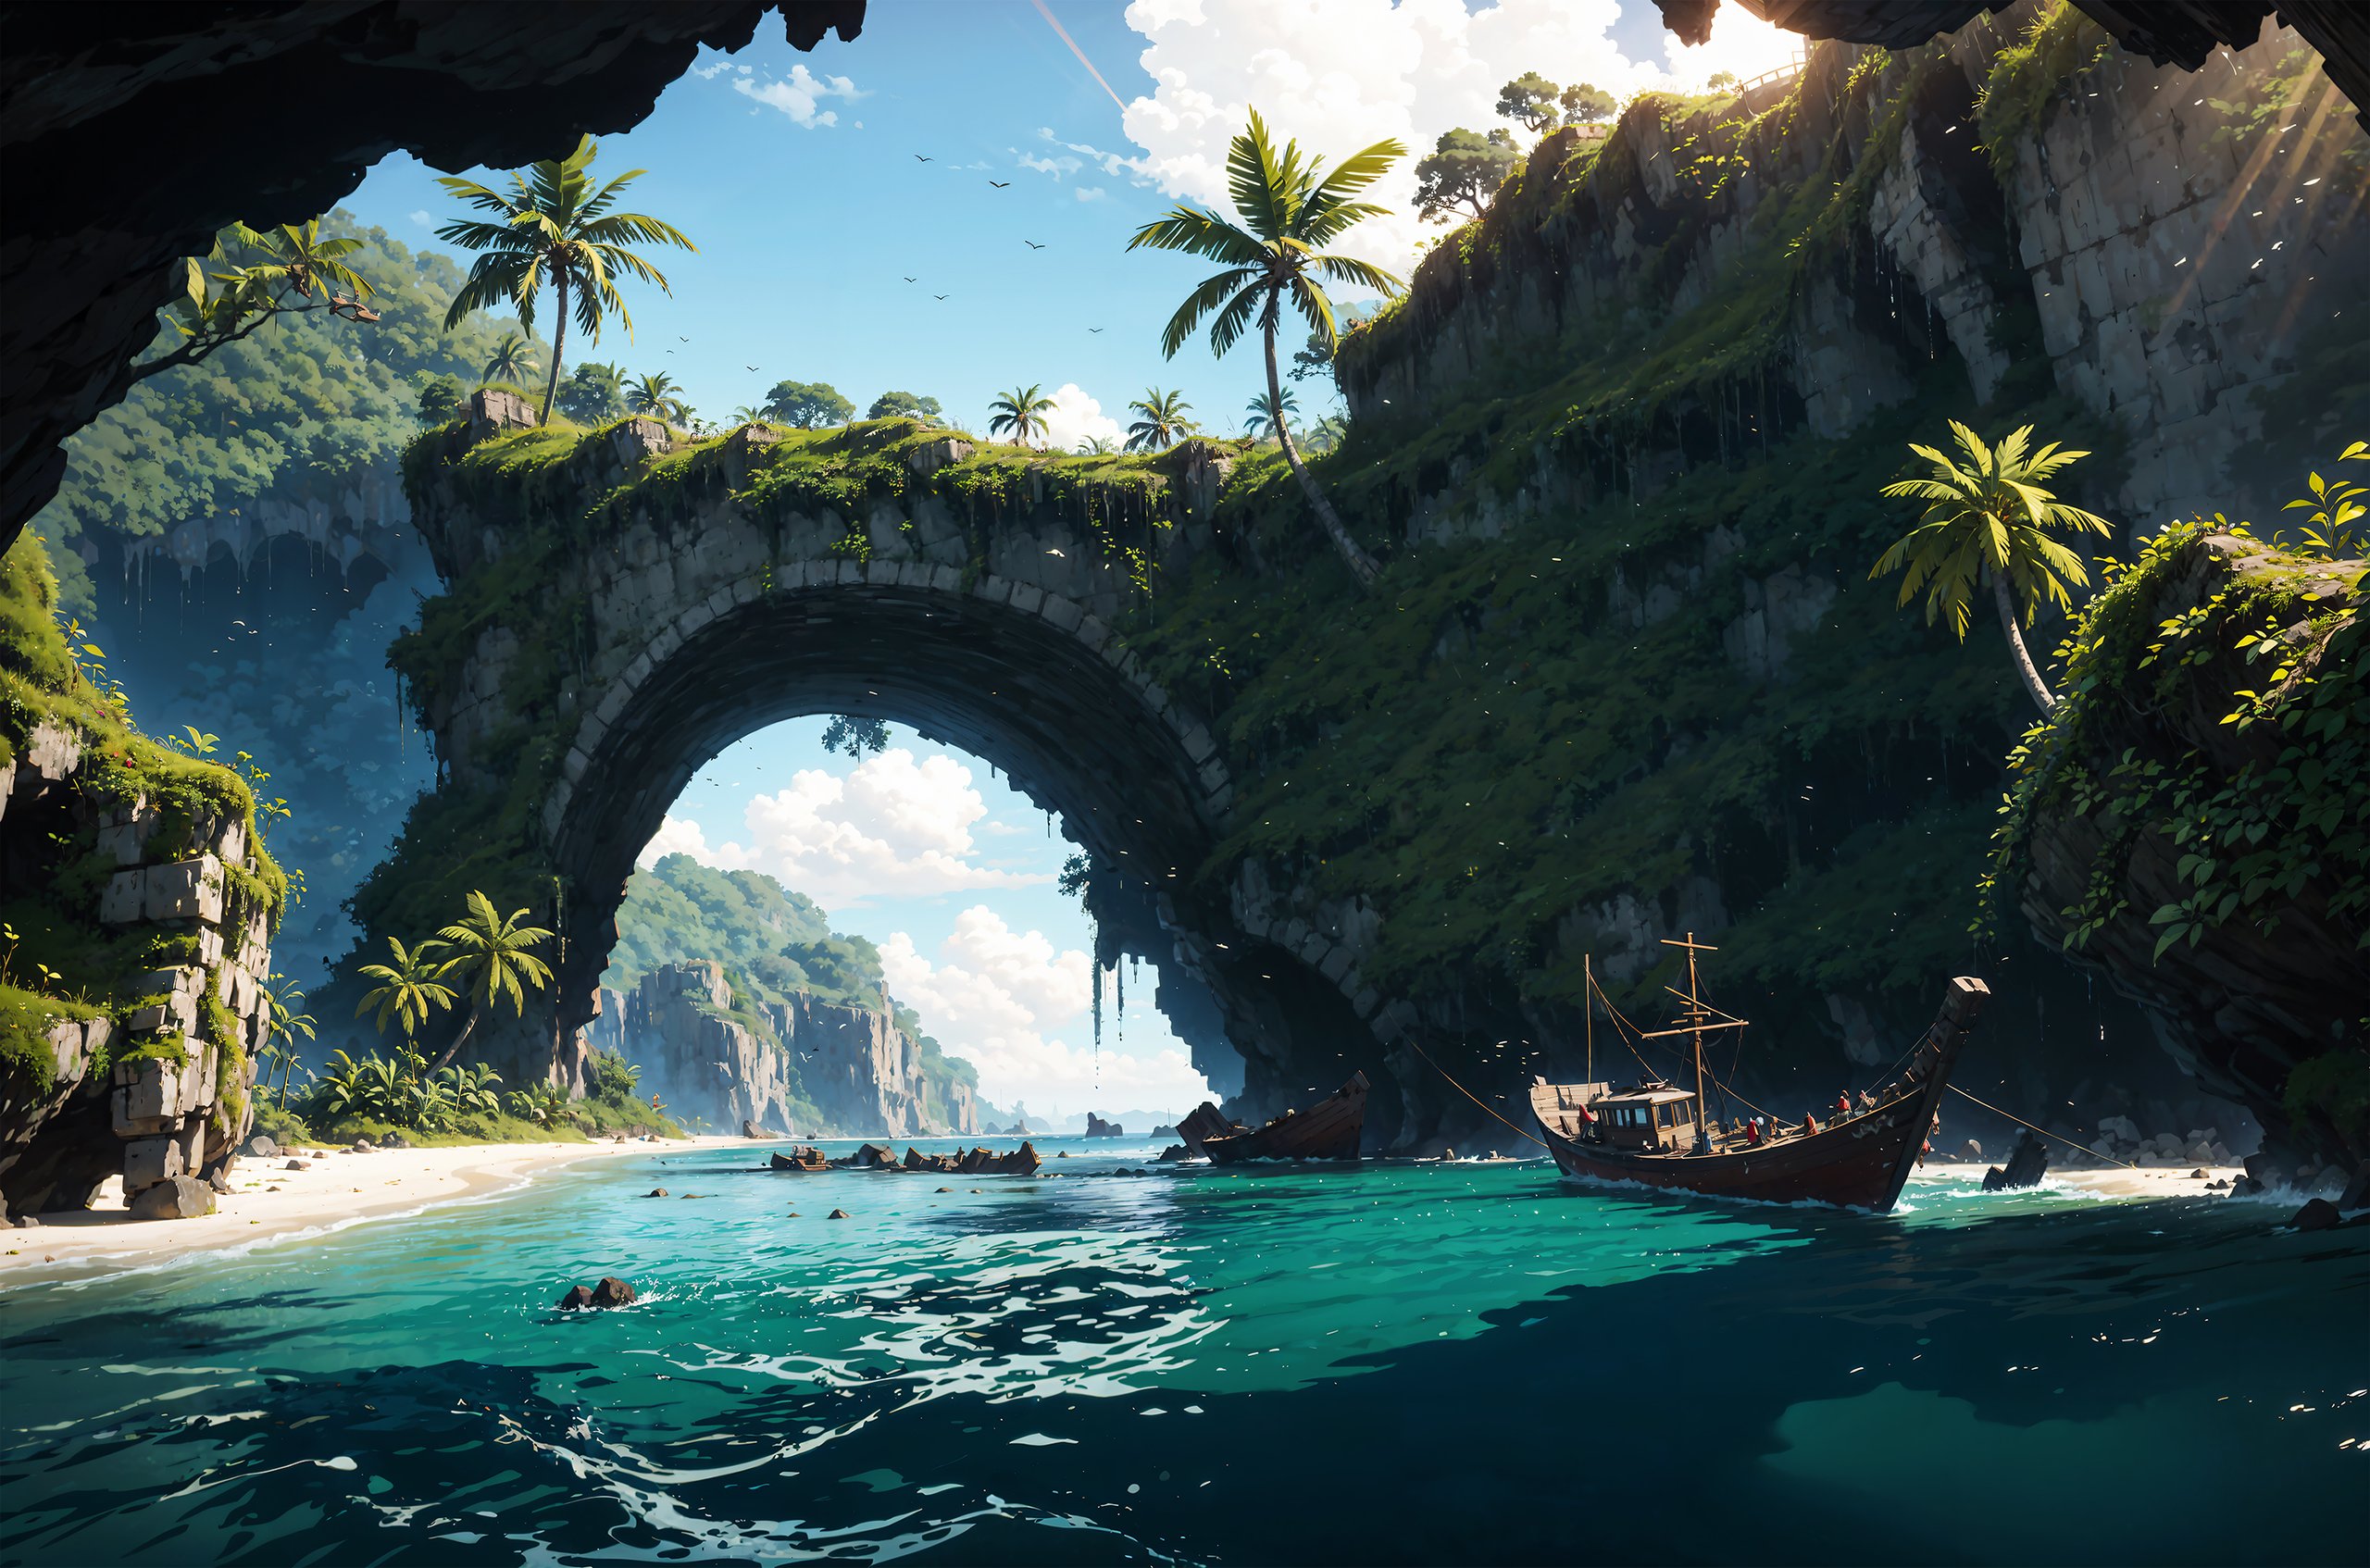 best quality,8k,hd,ultra realistic, fantasy jungle island,distant vulcano, golden beaches, sharp reef,cliffy shores, shipwreck, the thick dense jungle canopy hides an ancient temples, a mysterious costal cave, a hornets nest of epic proportions can be seen hanging under a old bridge